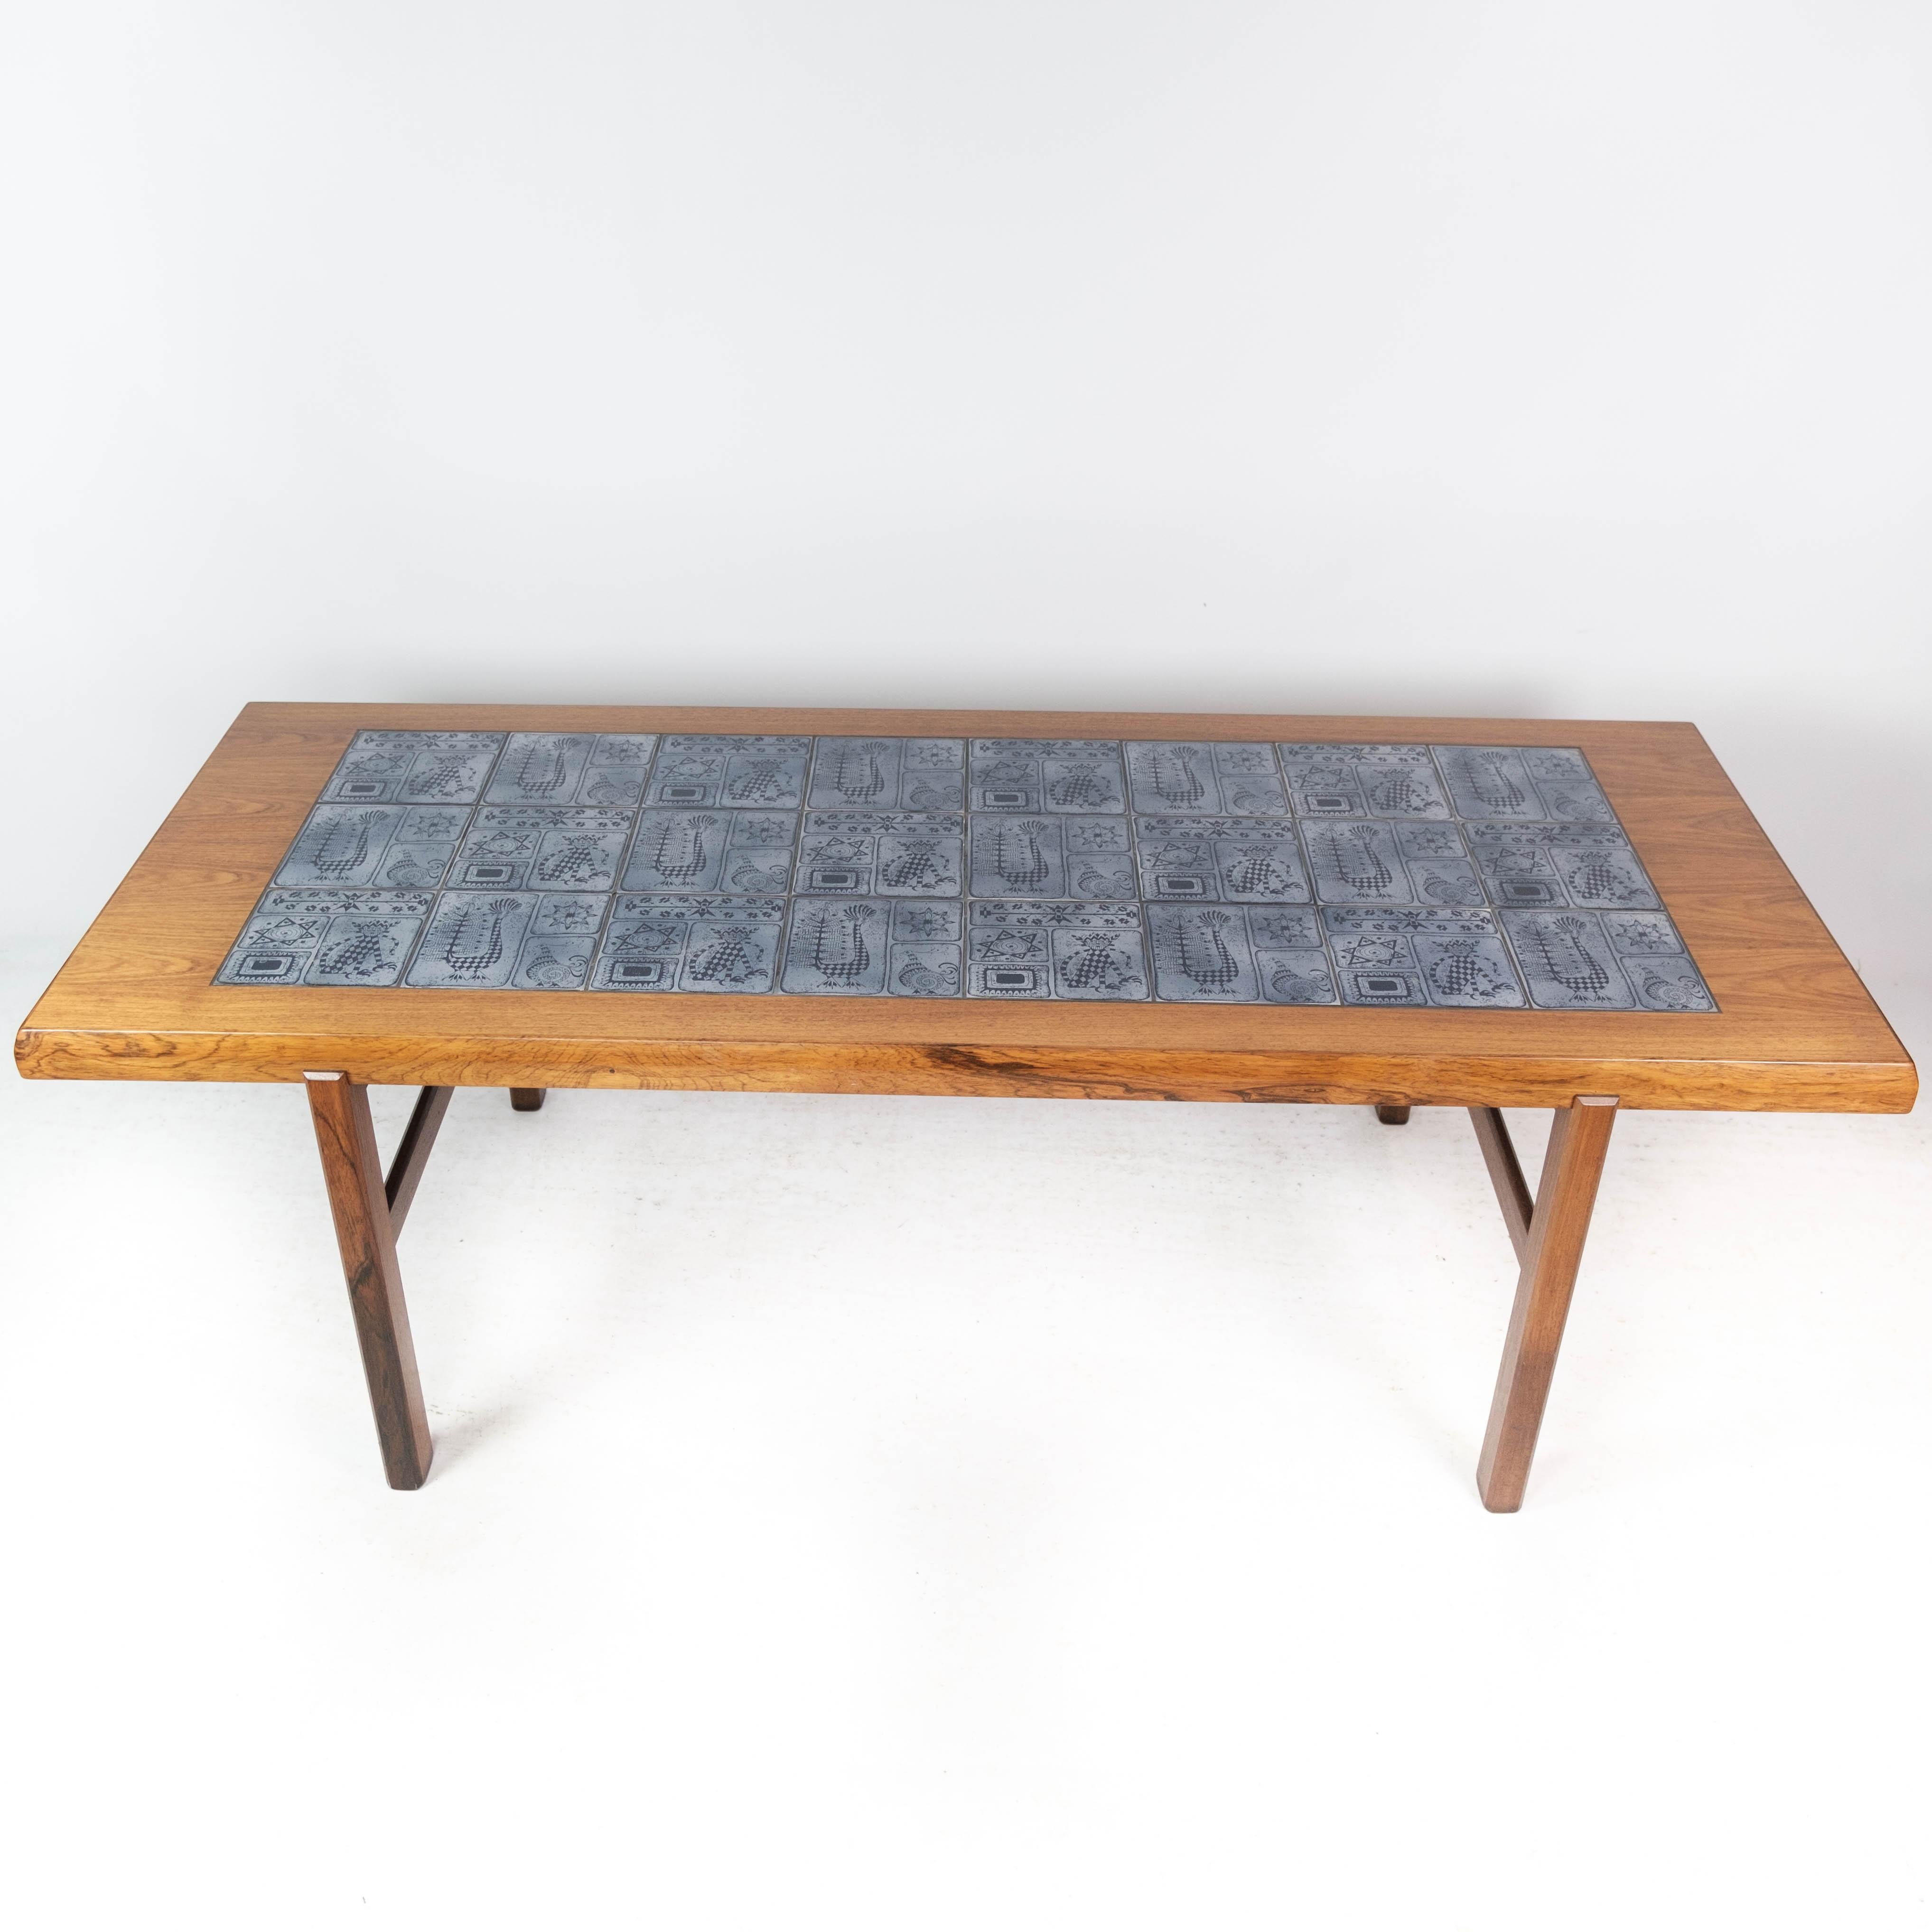 This elegant coffee table is a stunning example of Danish design from the 1960s, crafted with precision and style by Arrebo Furniture. Made from luxurious rosewood, the table exudes warmth and sophistication, adding a touch of timeless elegance to